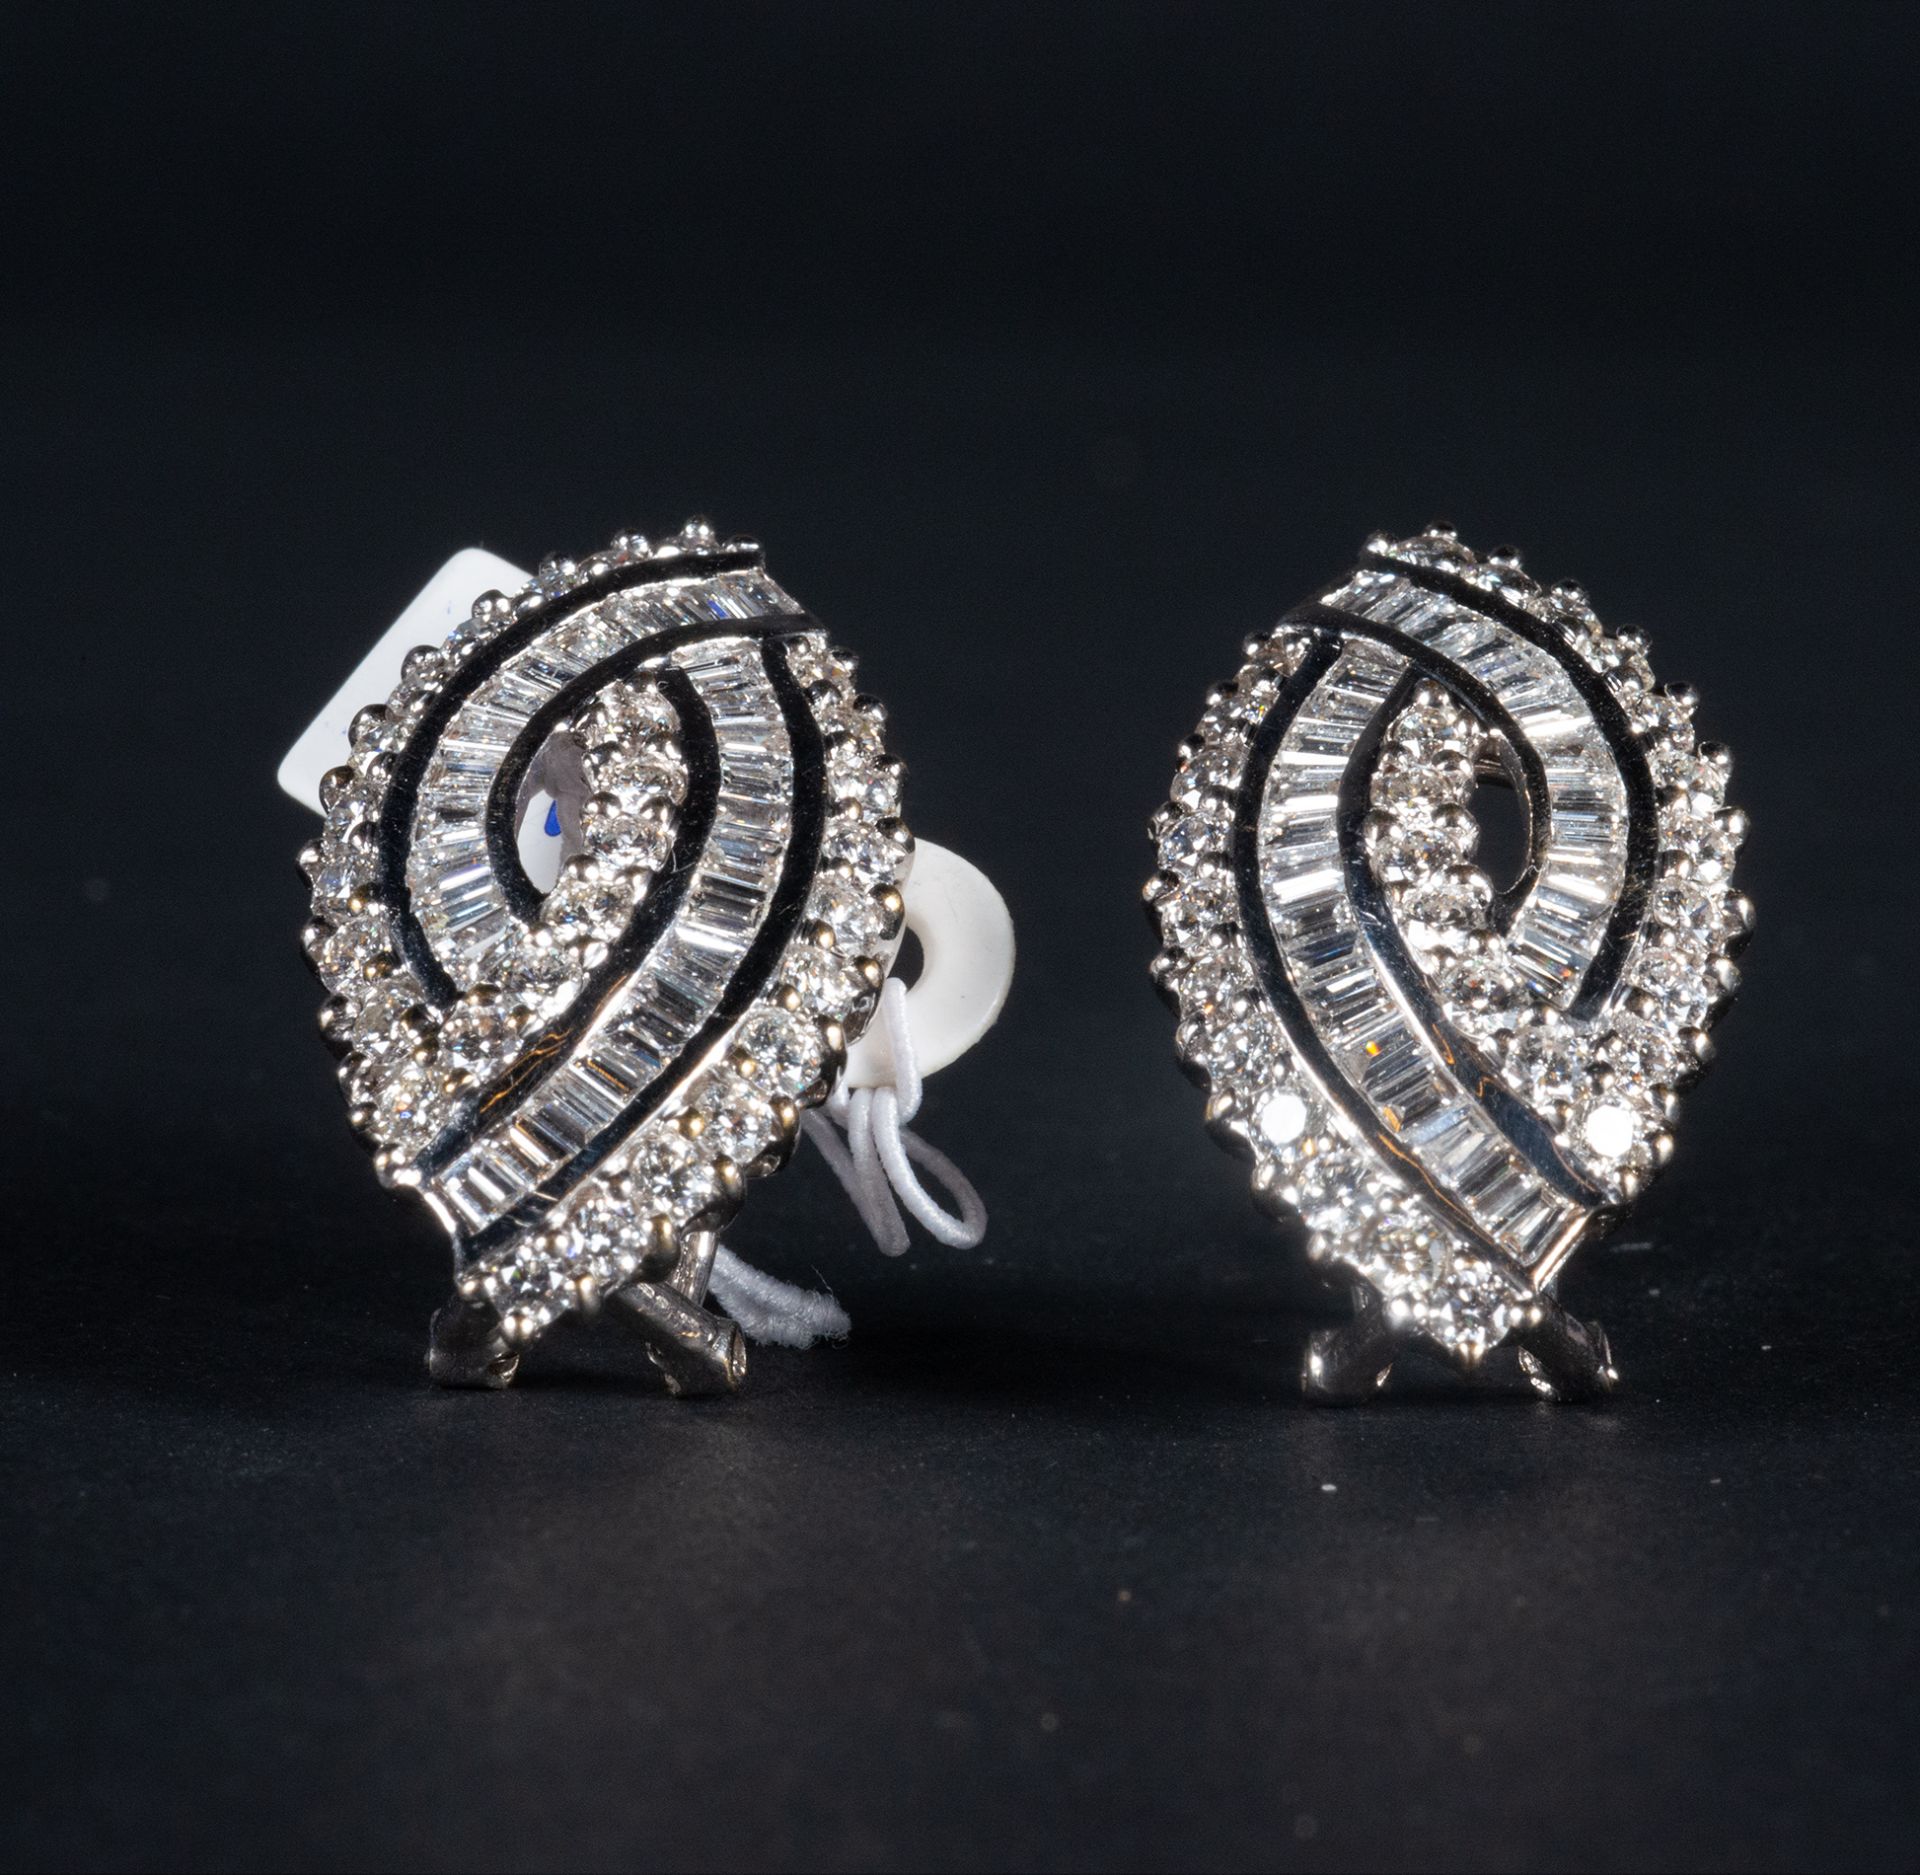 Exceptional pair of oval earrings in 18k white gold and baguette-cut and brilliant-cut diamonds